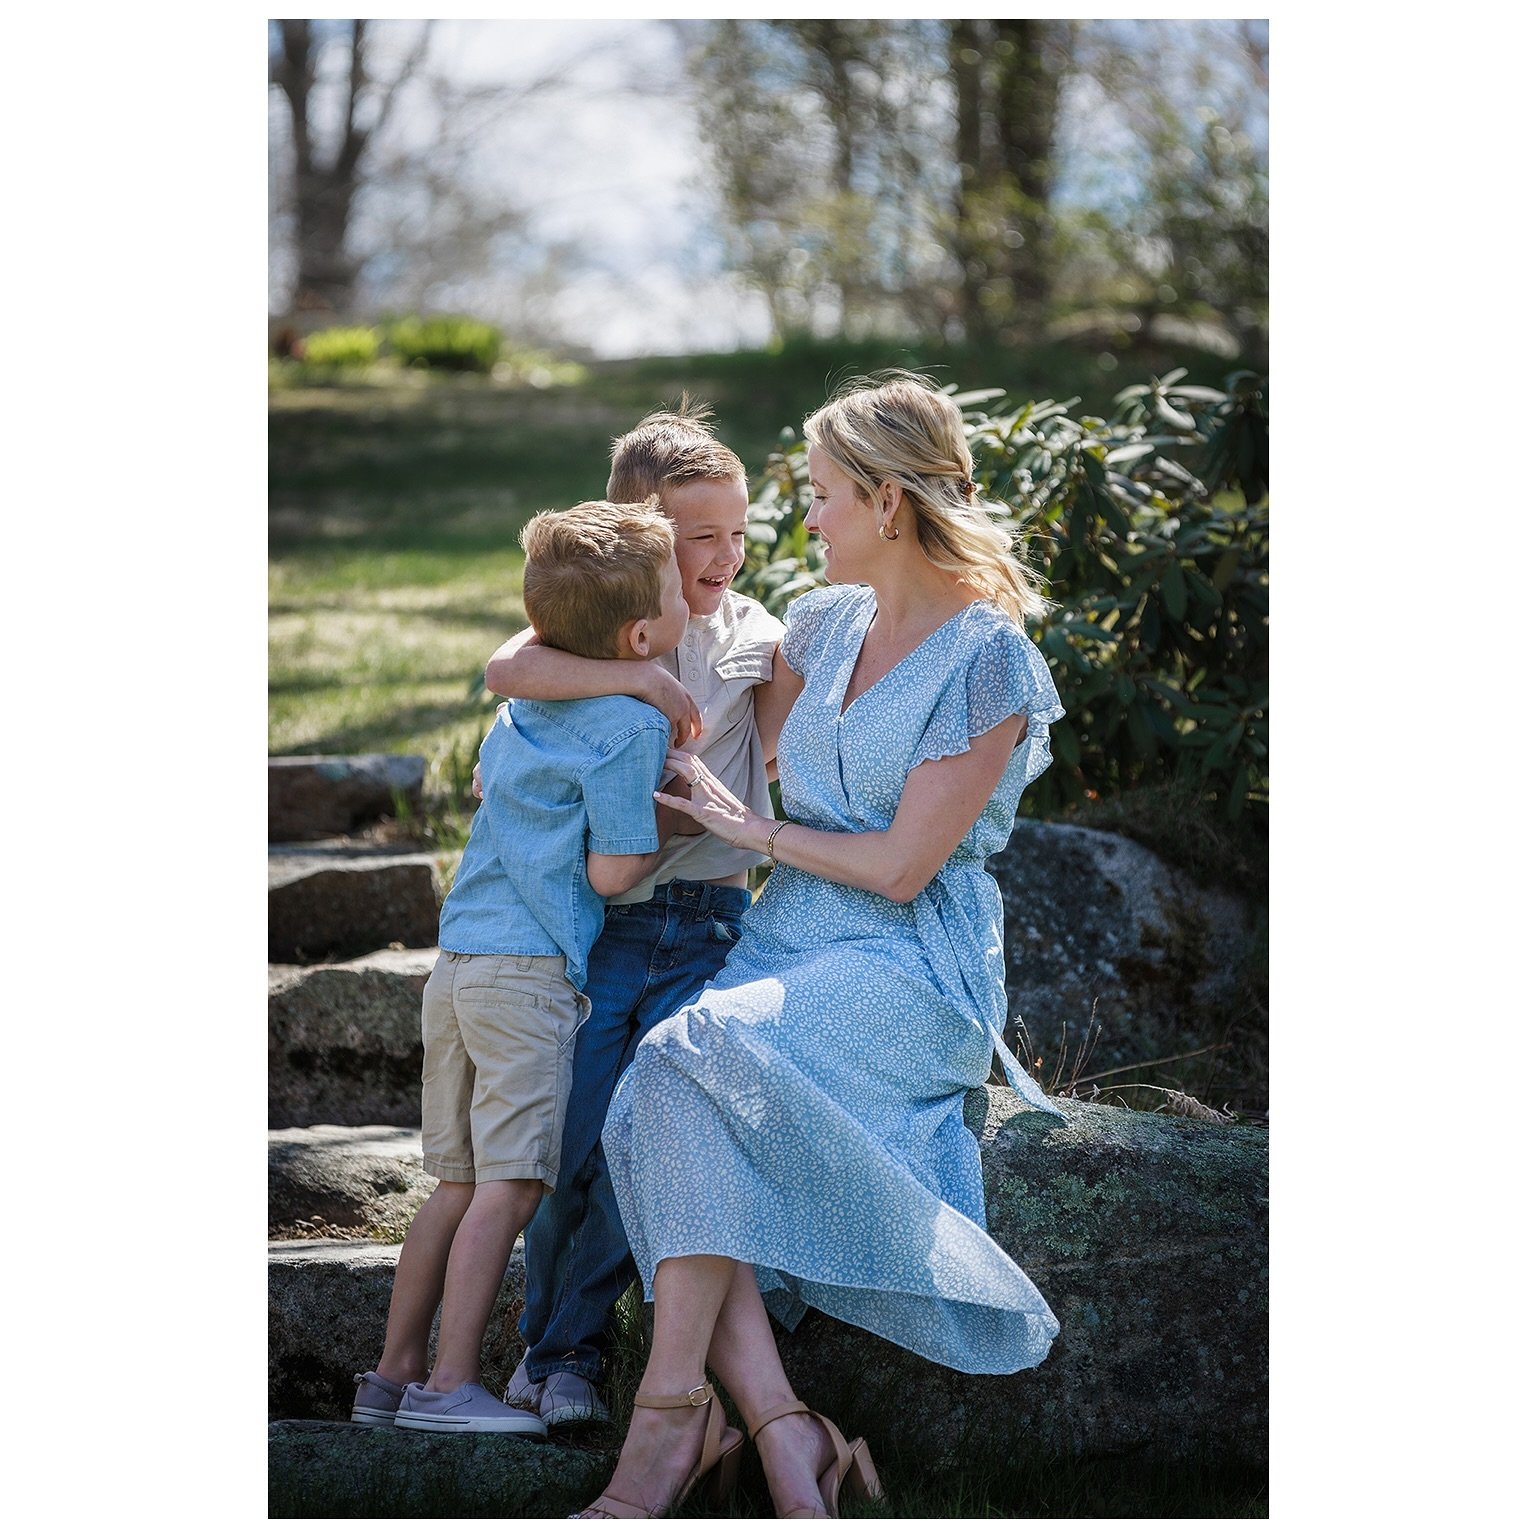 My spring mini sessions are only a few weeks away. I still have a few spots available. Check out the link in my bio for all the information and to sign up. 

#nhphotographer #springminisessions #familyphotographer